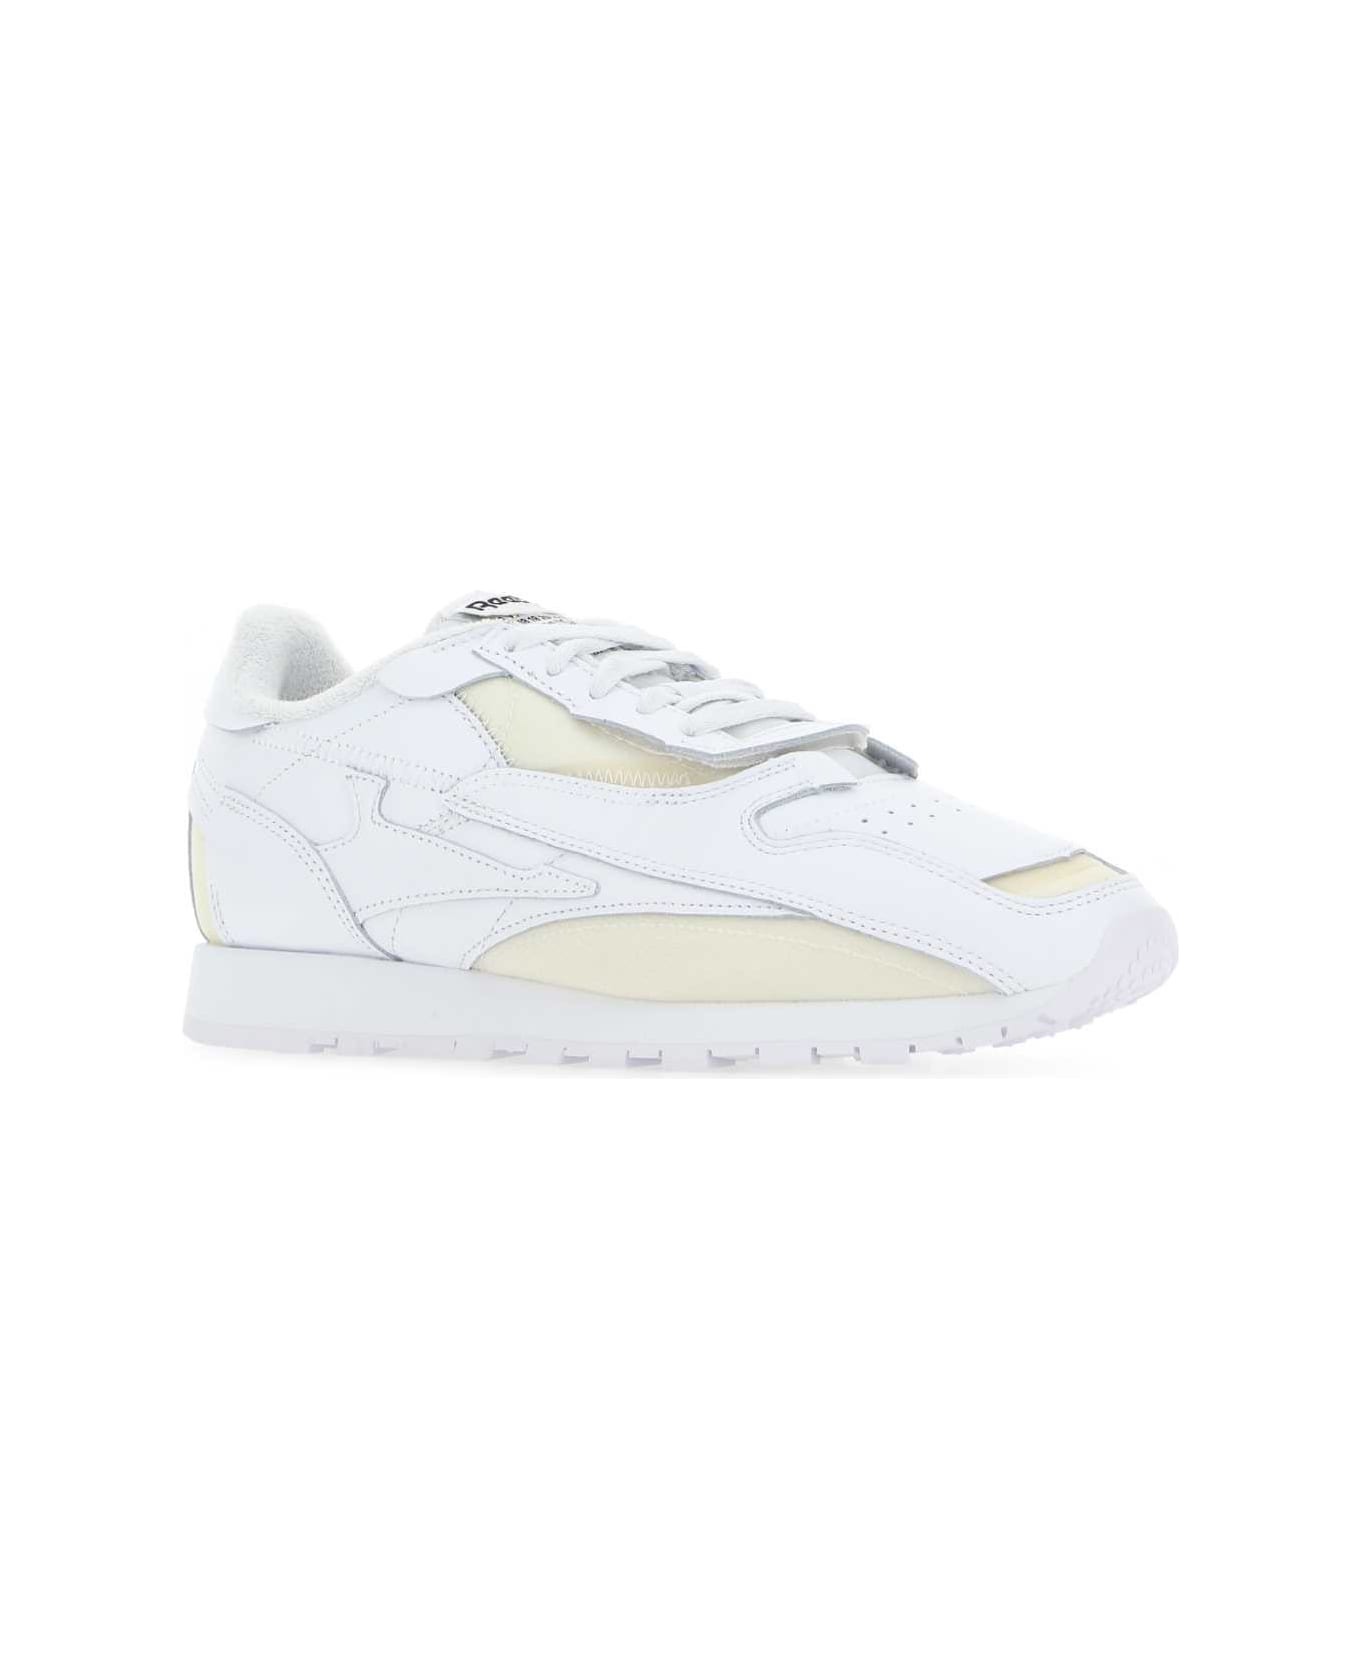 Reebok White Leather And Fabric Project 0 Cl Memory Of V2 Sneakers - T1003 スニーカー